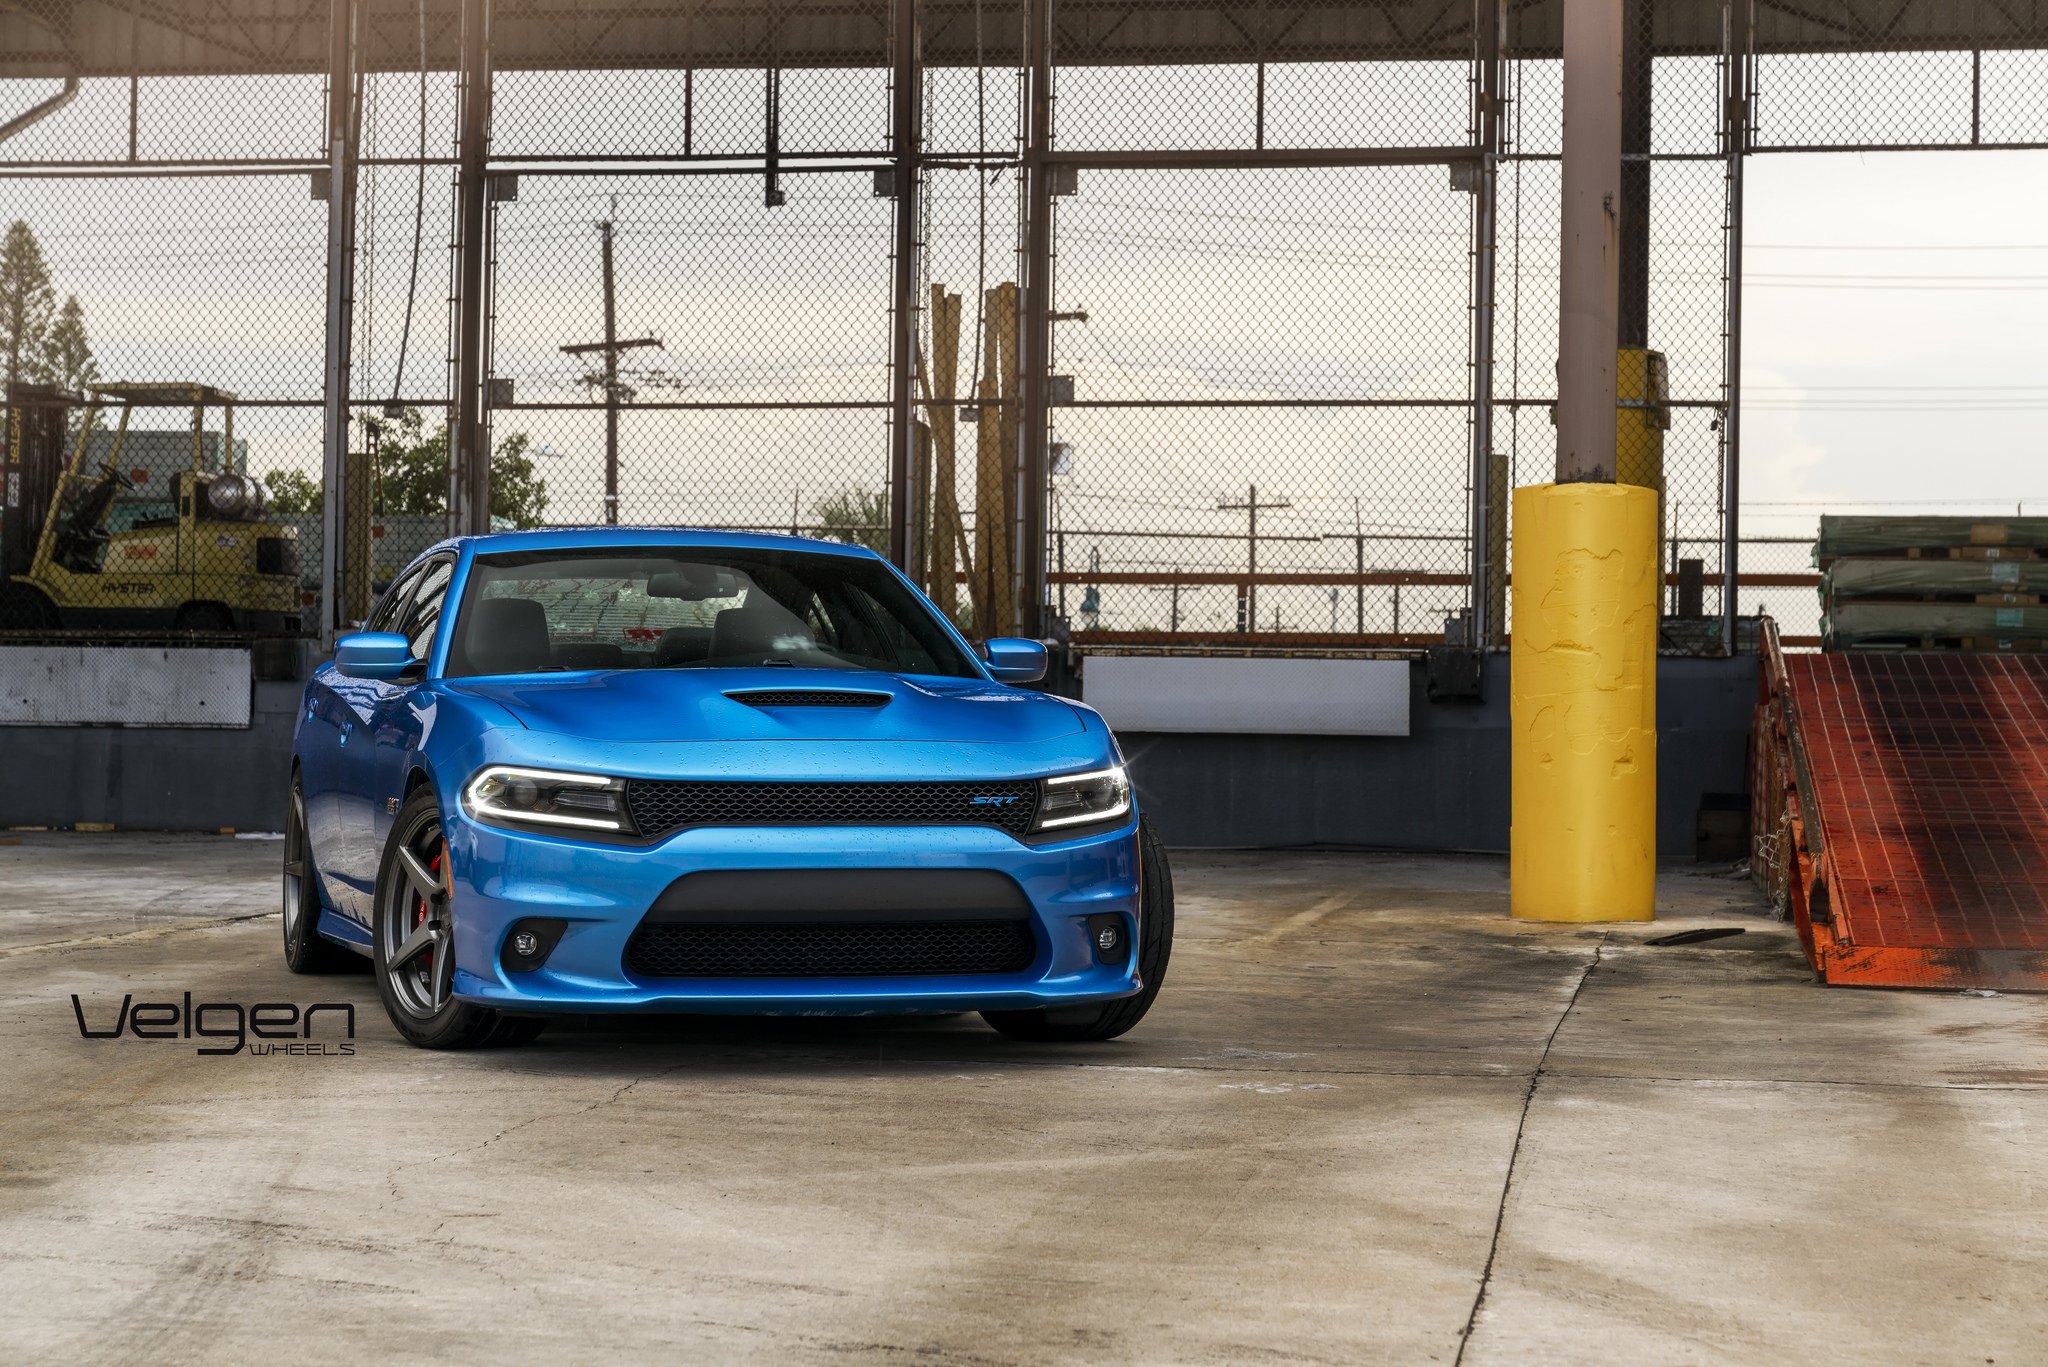 Aftermarket LED-Bar Style Headlights on Blue Dodge Charger - Photo by Velgen Wheels